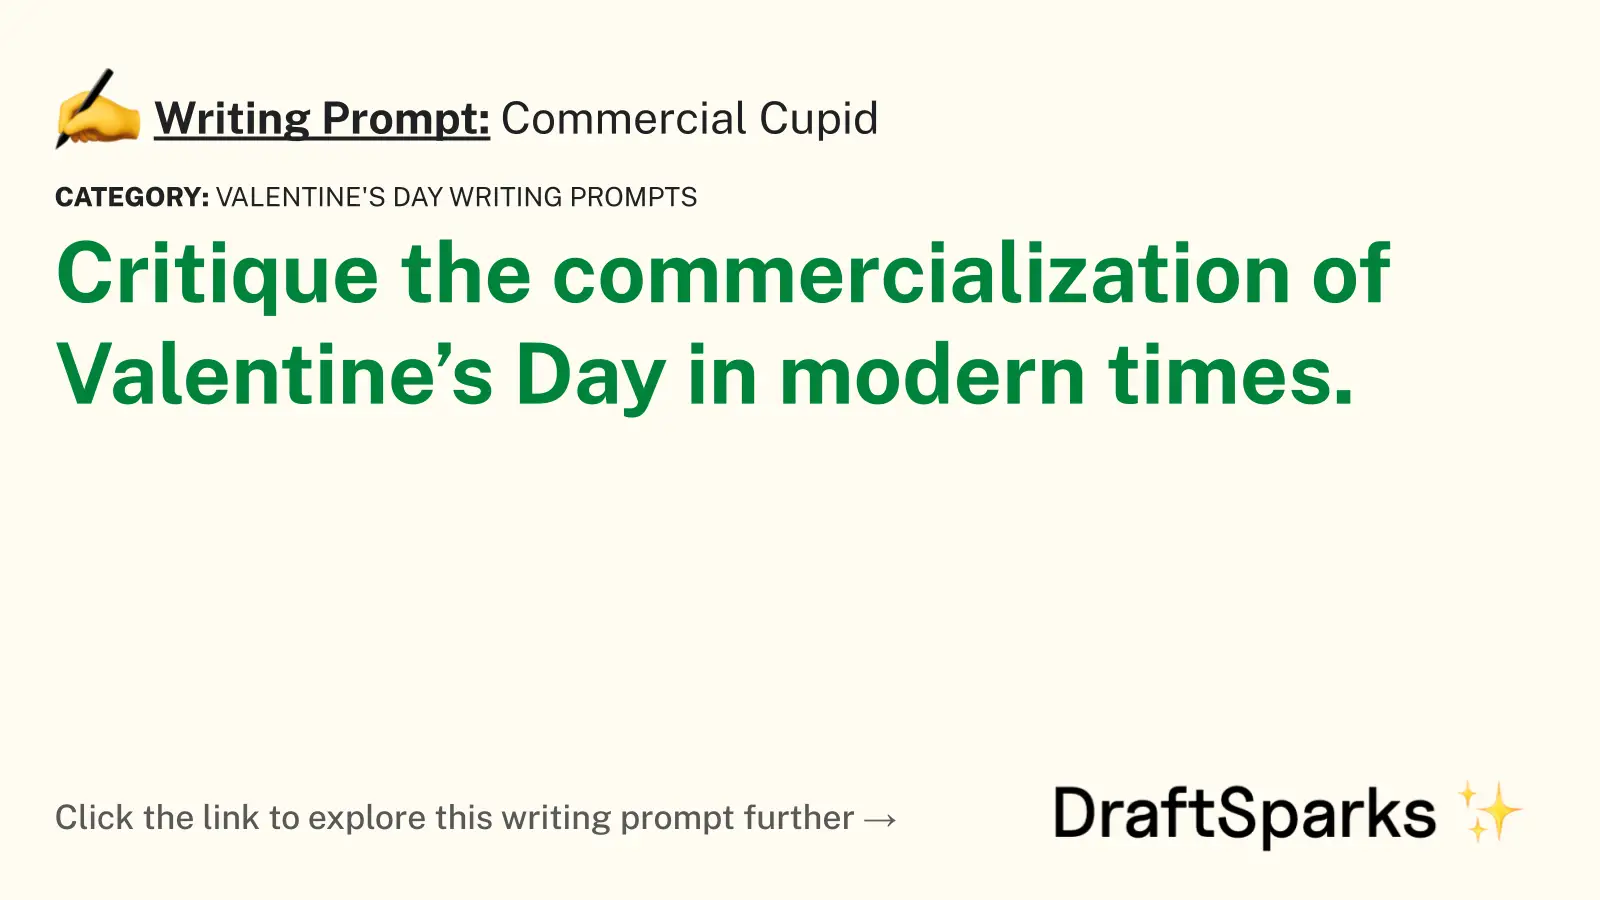 Commercial Cupid